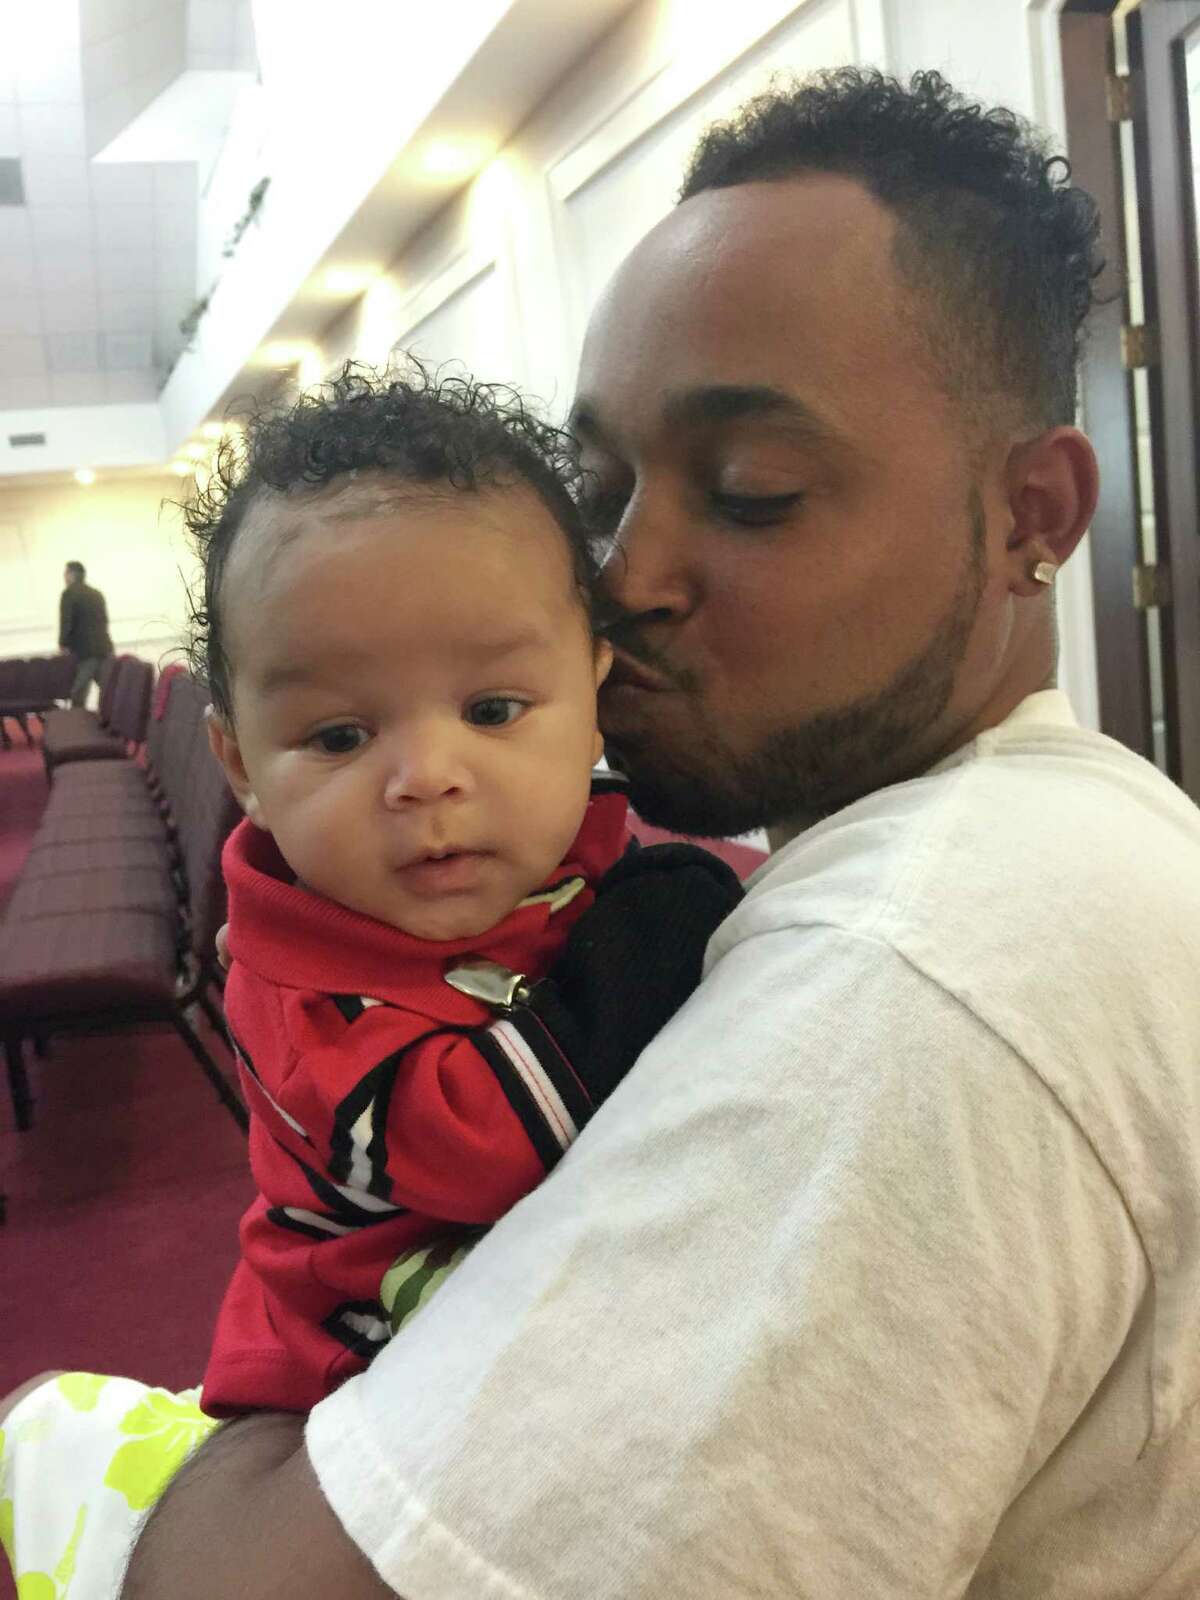 ﻿Rodrin Hinton, holding his son, Rodrin﻿ Jr., died in March in ﻿the Harris County Jail. ﻿